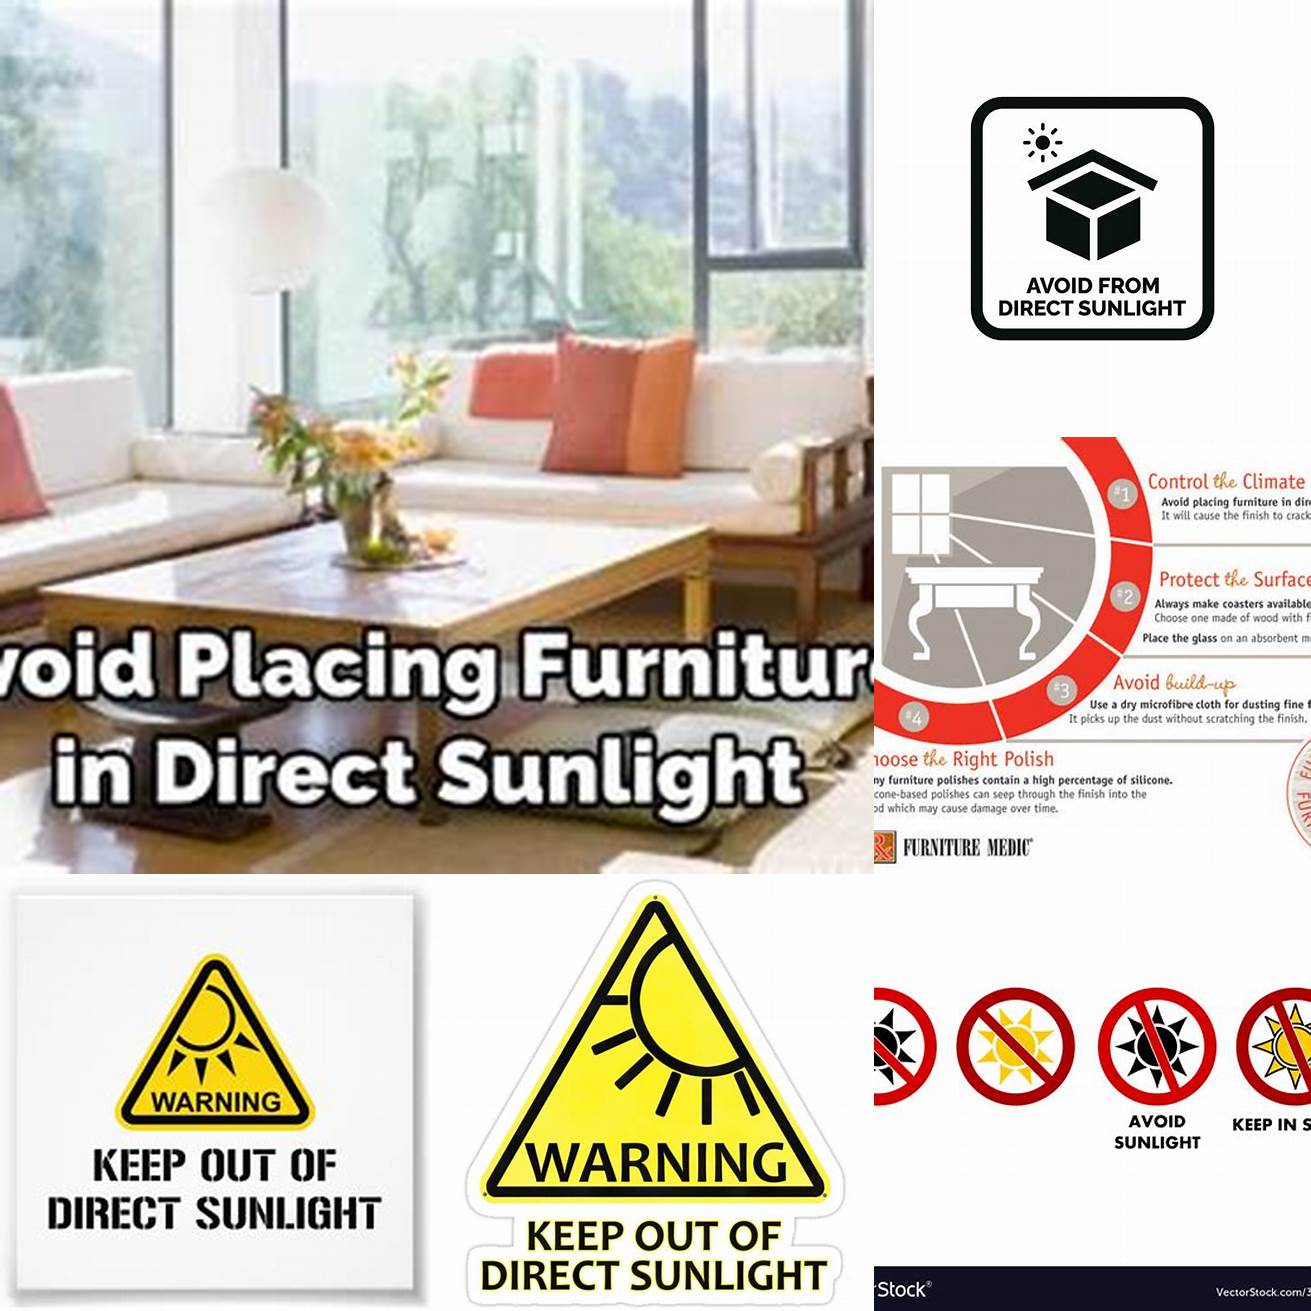 Avoid Placing Items in Direct Sunlight